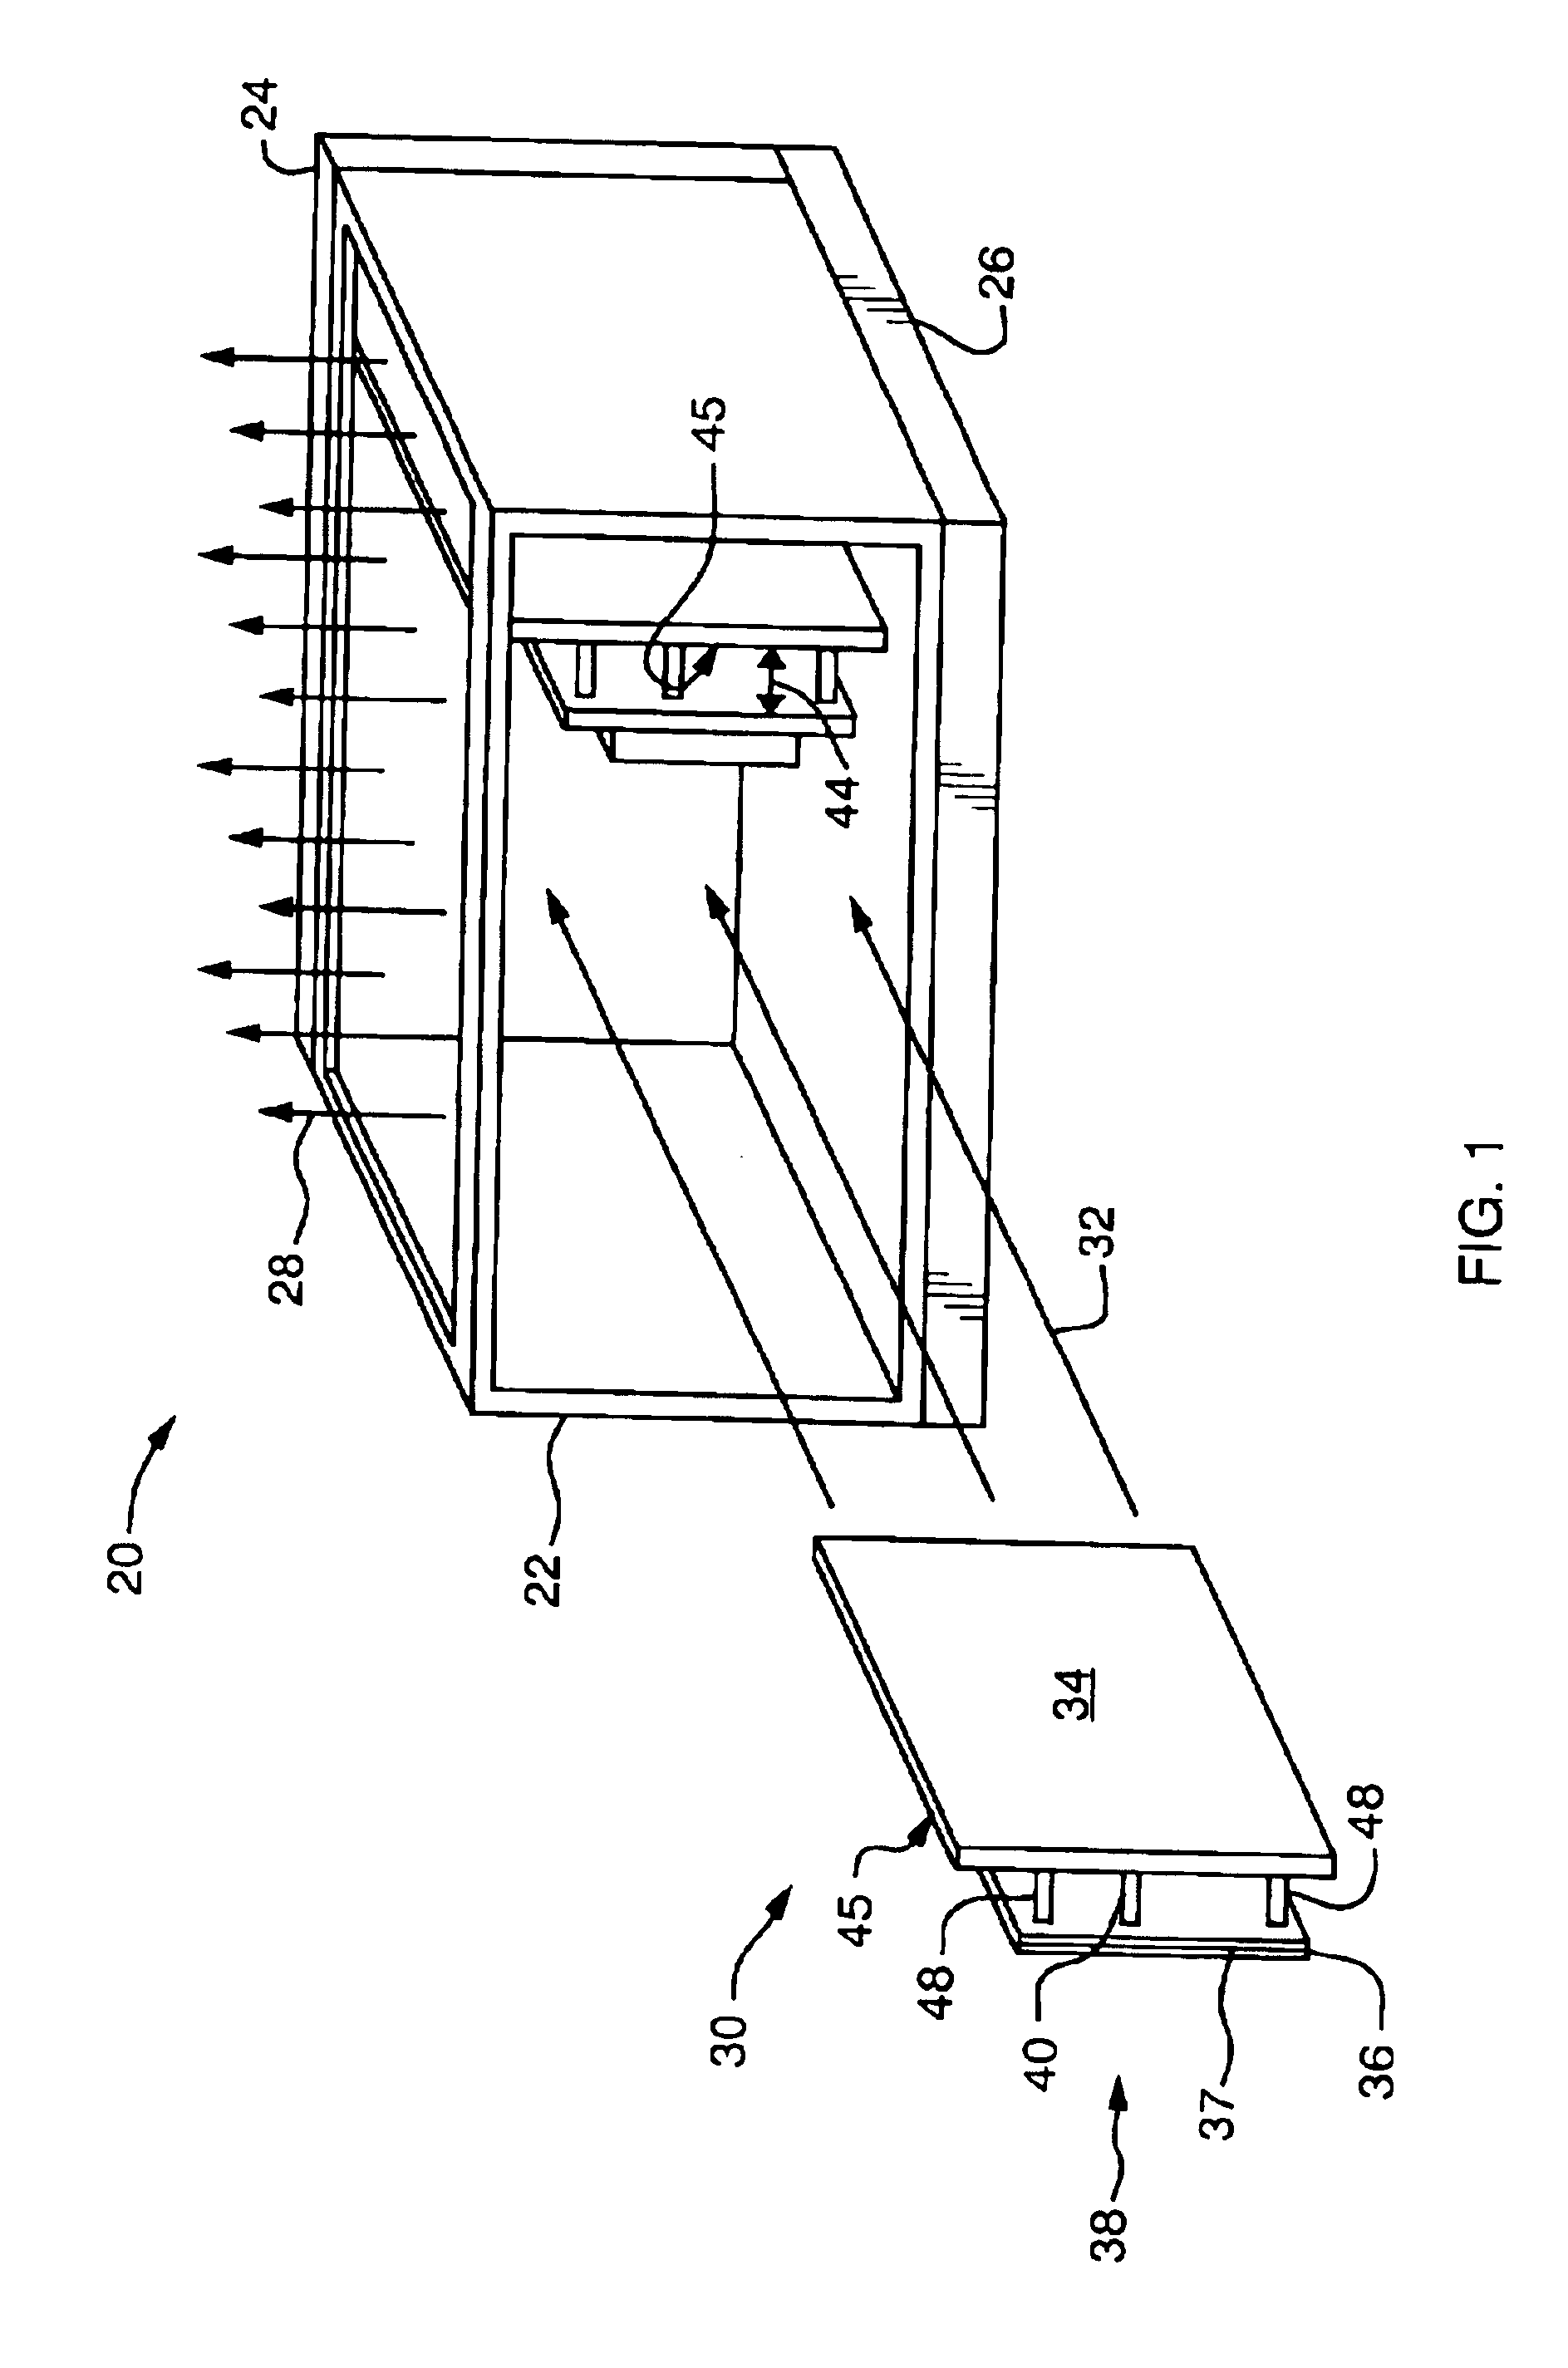 Methods and apparatus for grounding a circuit board